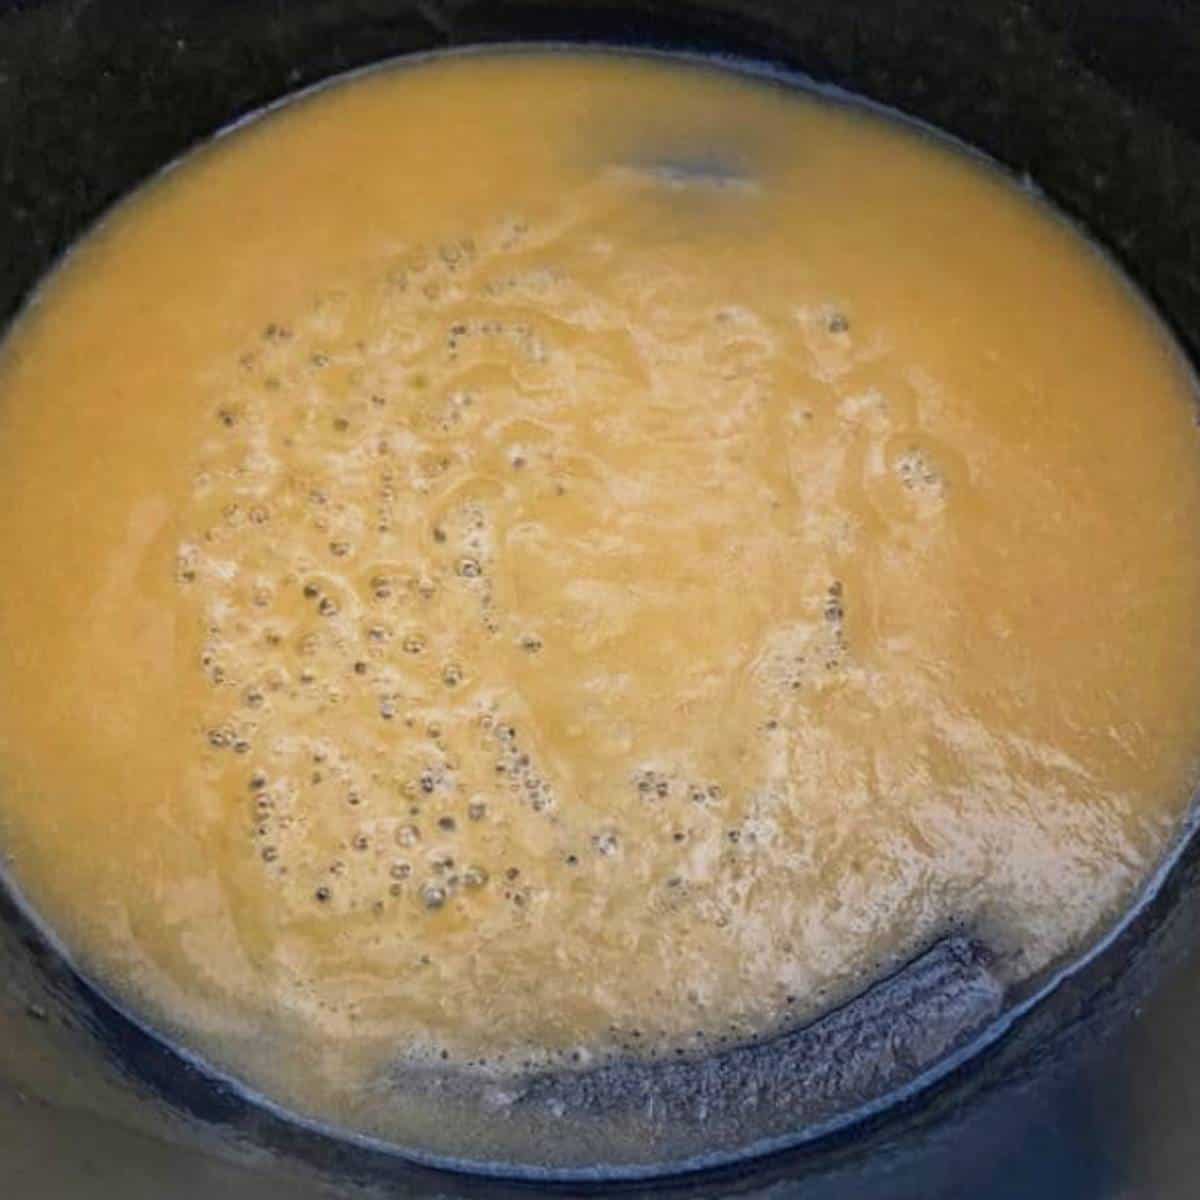 Roux cooking in skillet.